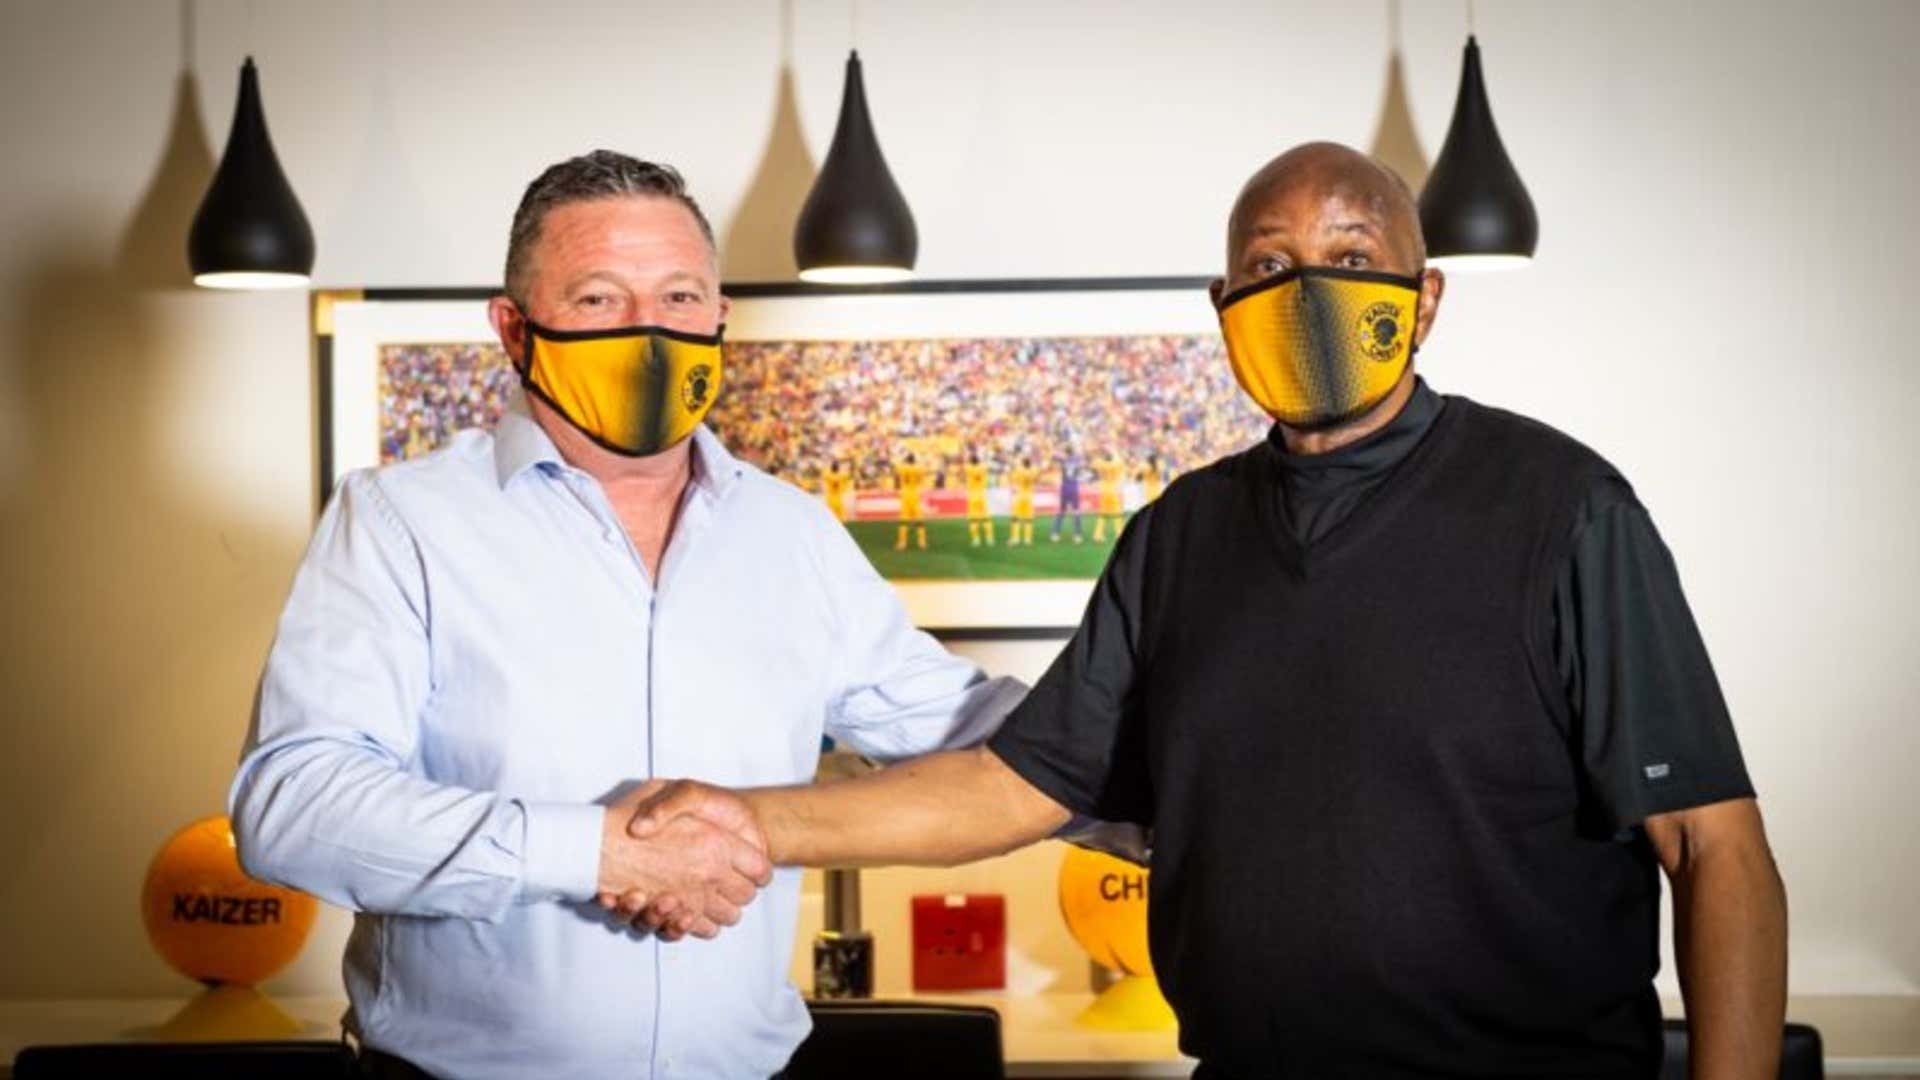 Gavin Hunt and Kaizer Motaung of Kaizer Chiefs